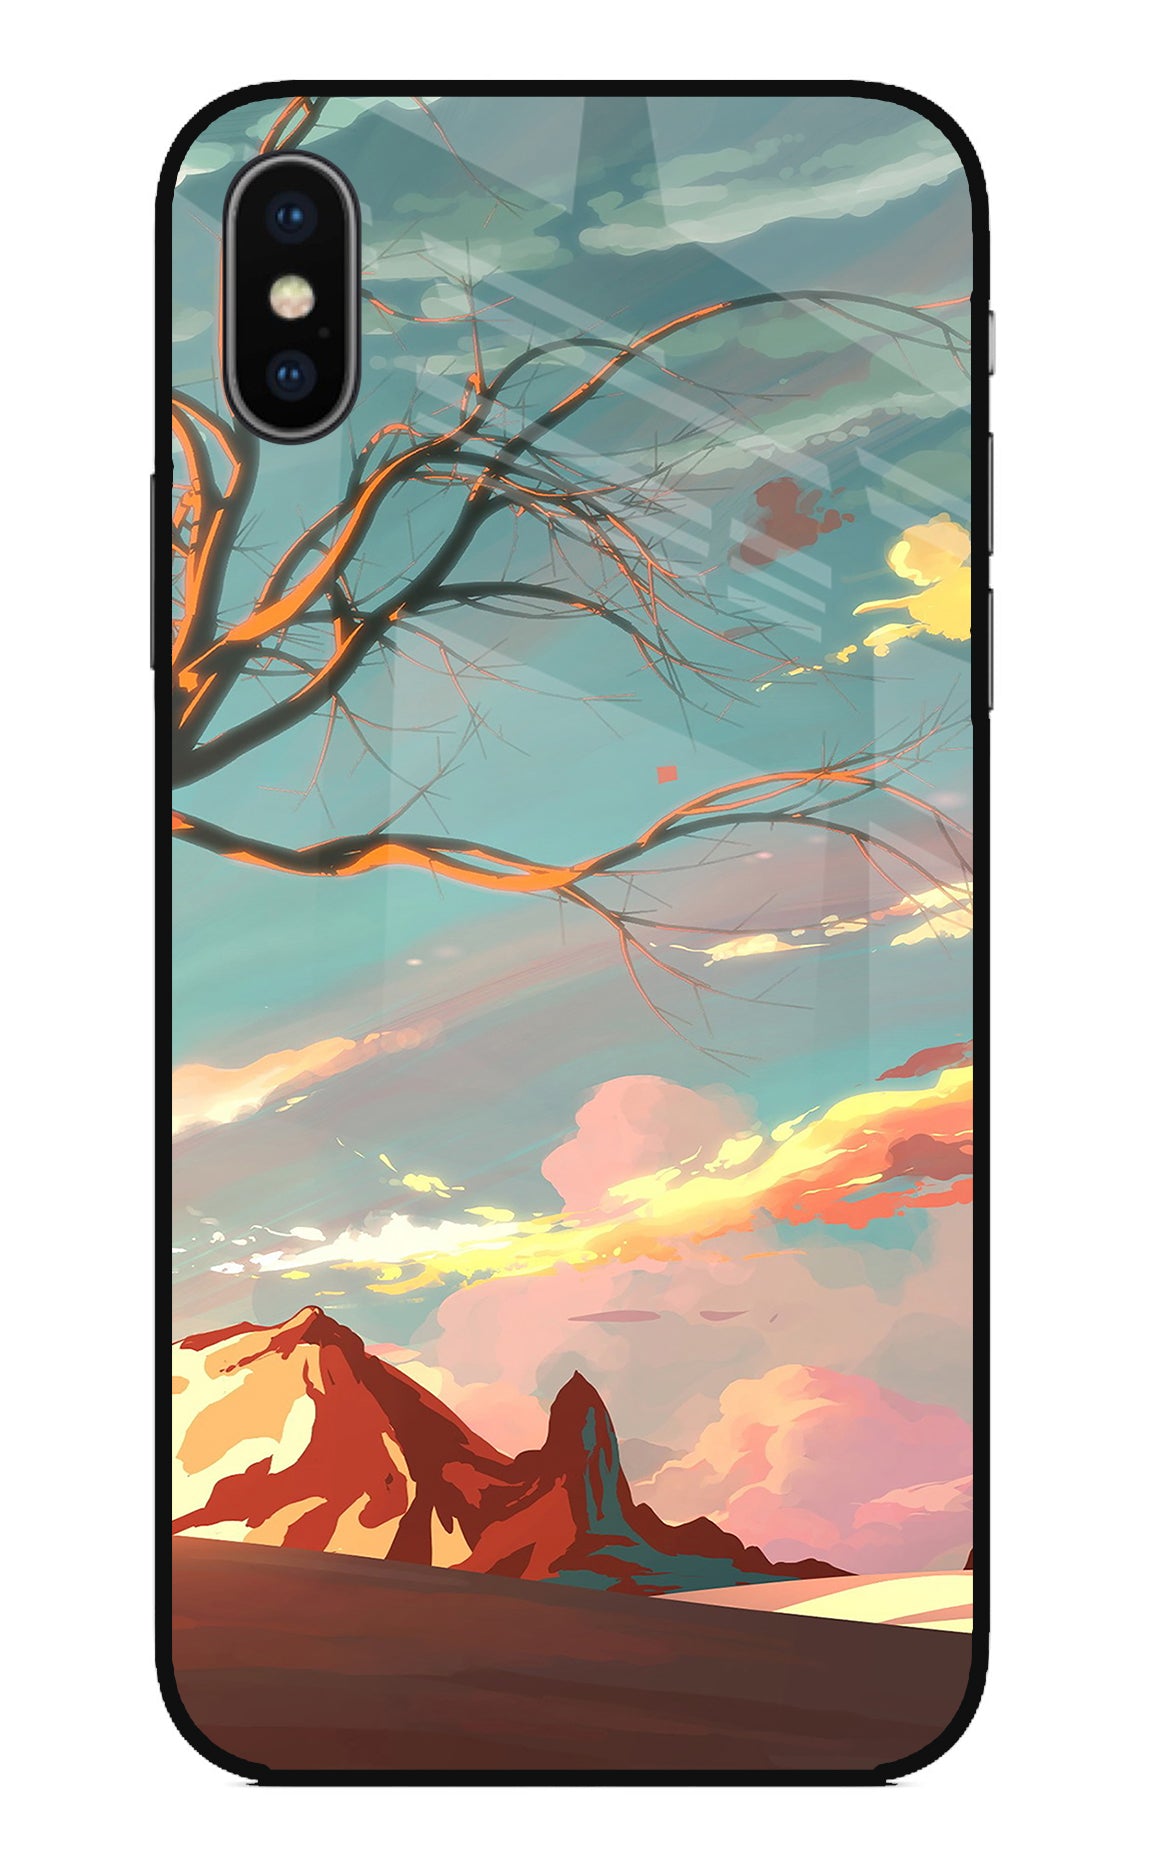 Scenery iPhone XS Back Cover